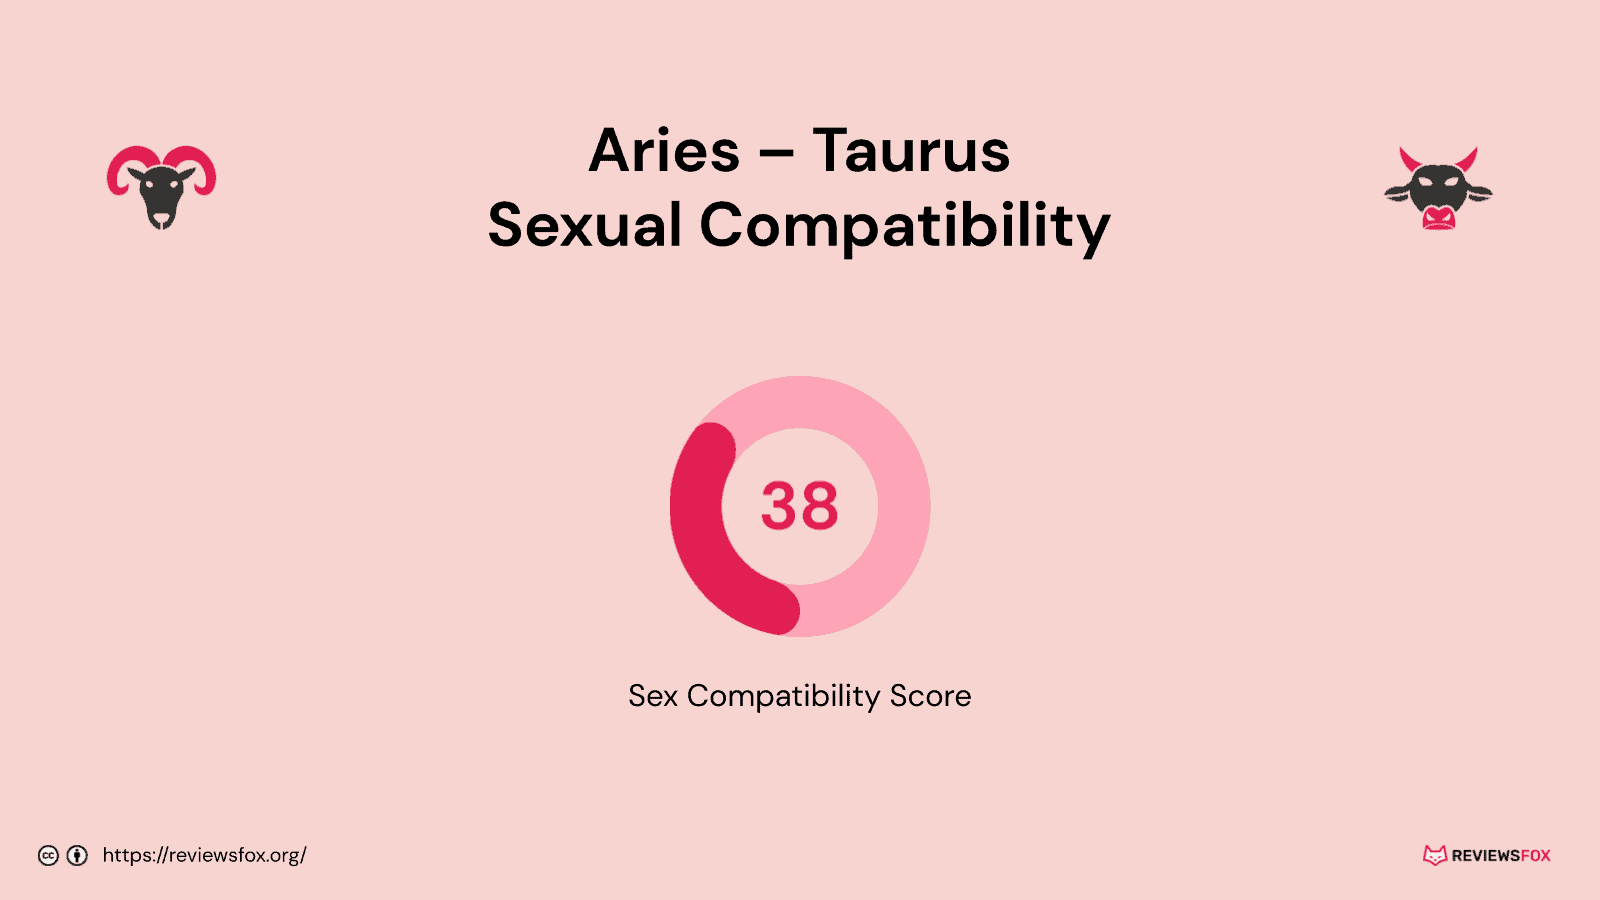 Aries and Taurus sexual compatibility